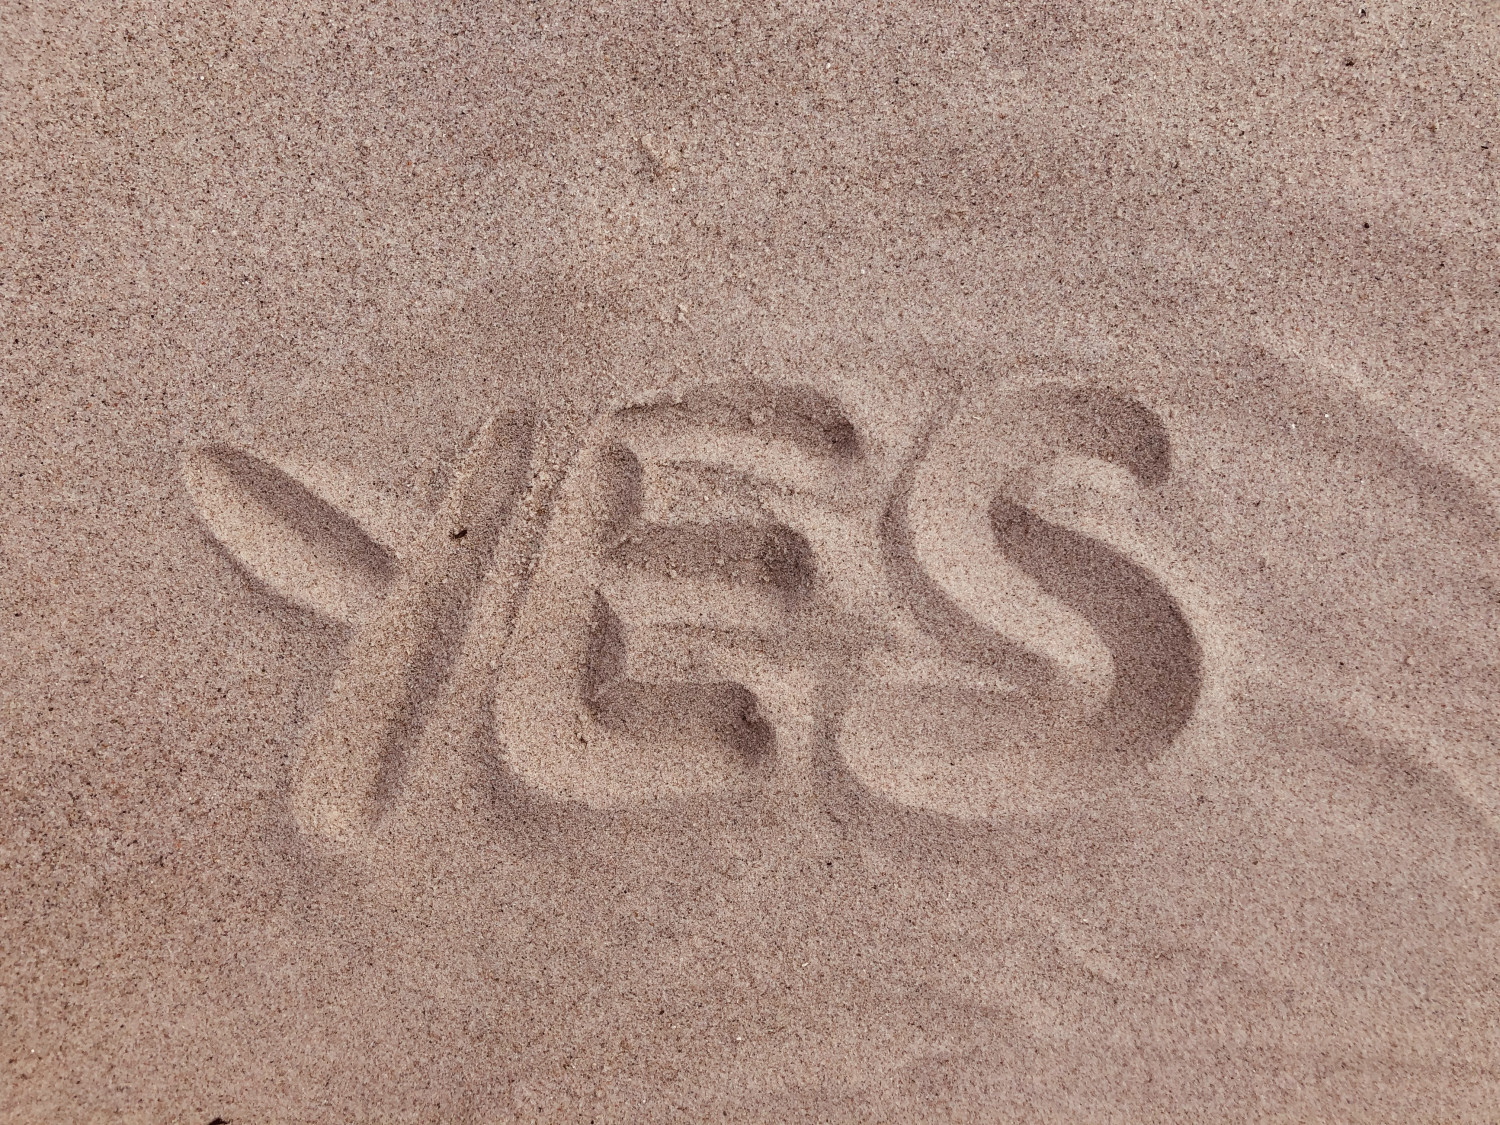 The word Yes written in sand